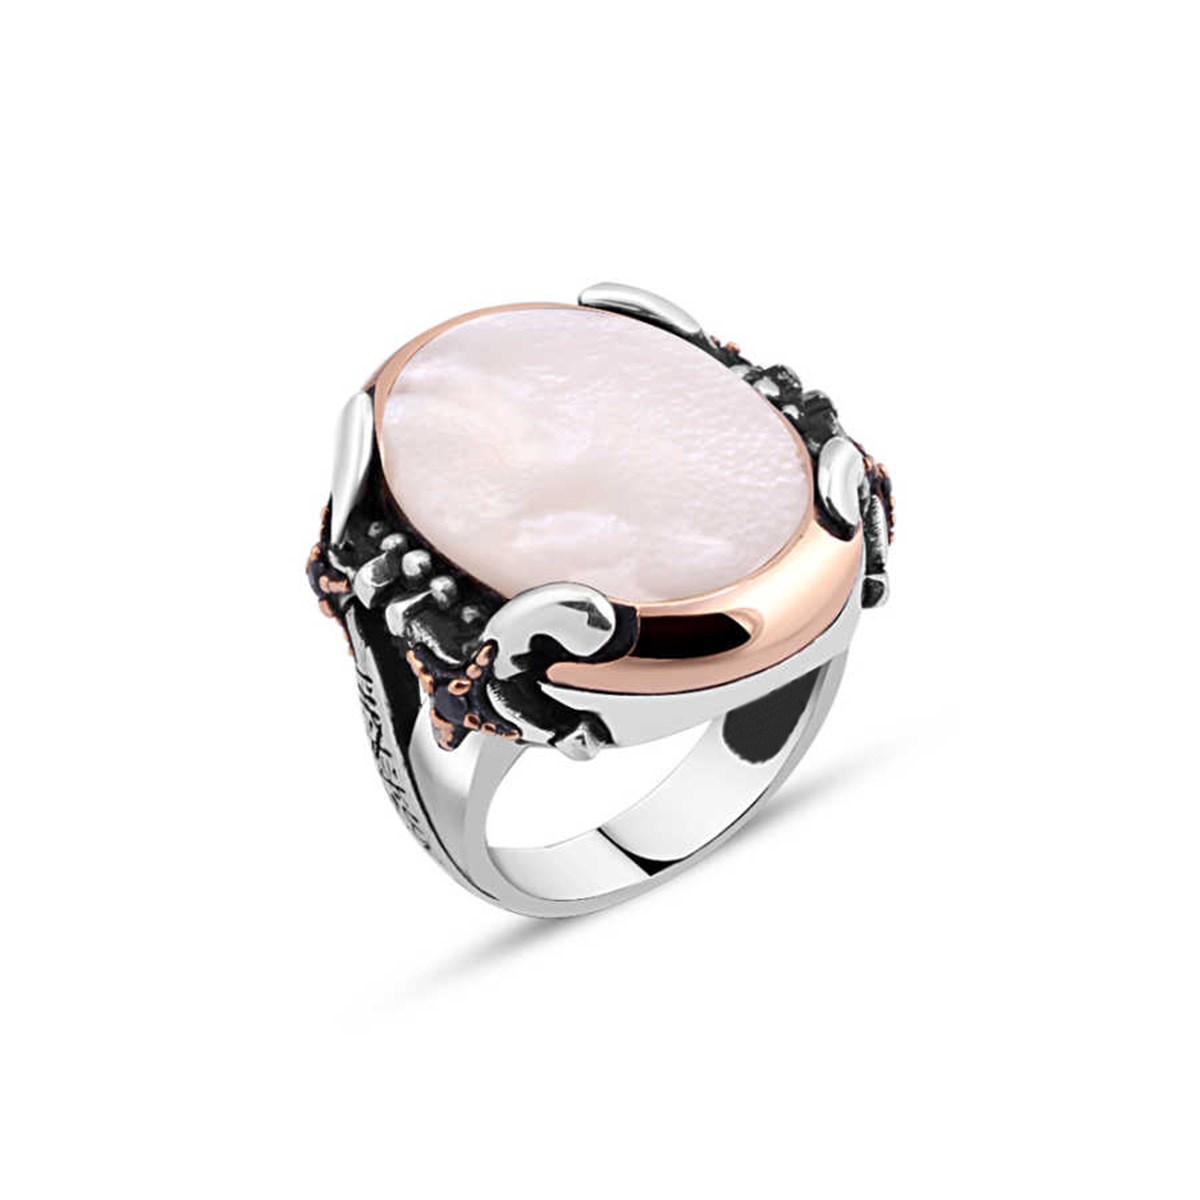 Sterling Silver Men's Ring with Plain Mother-of-Pearl Stones